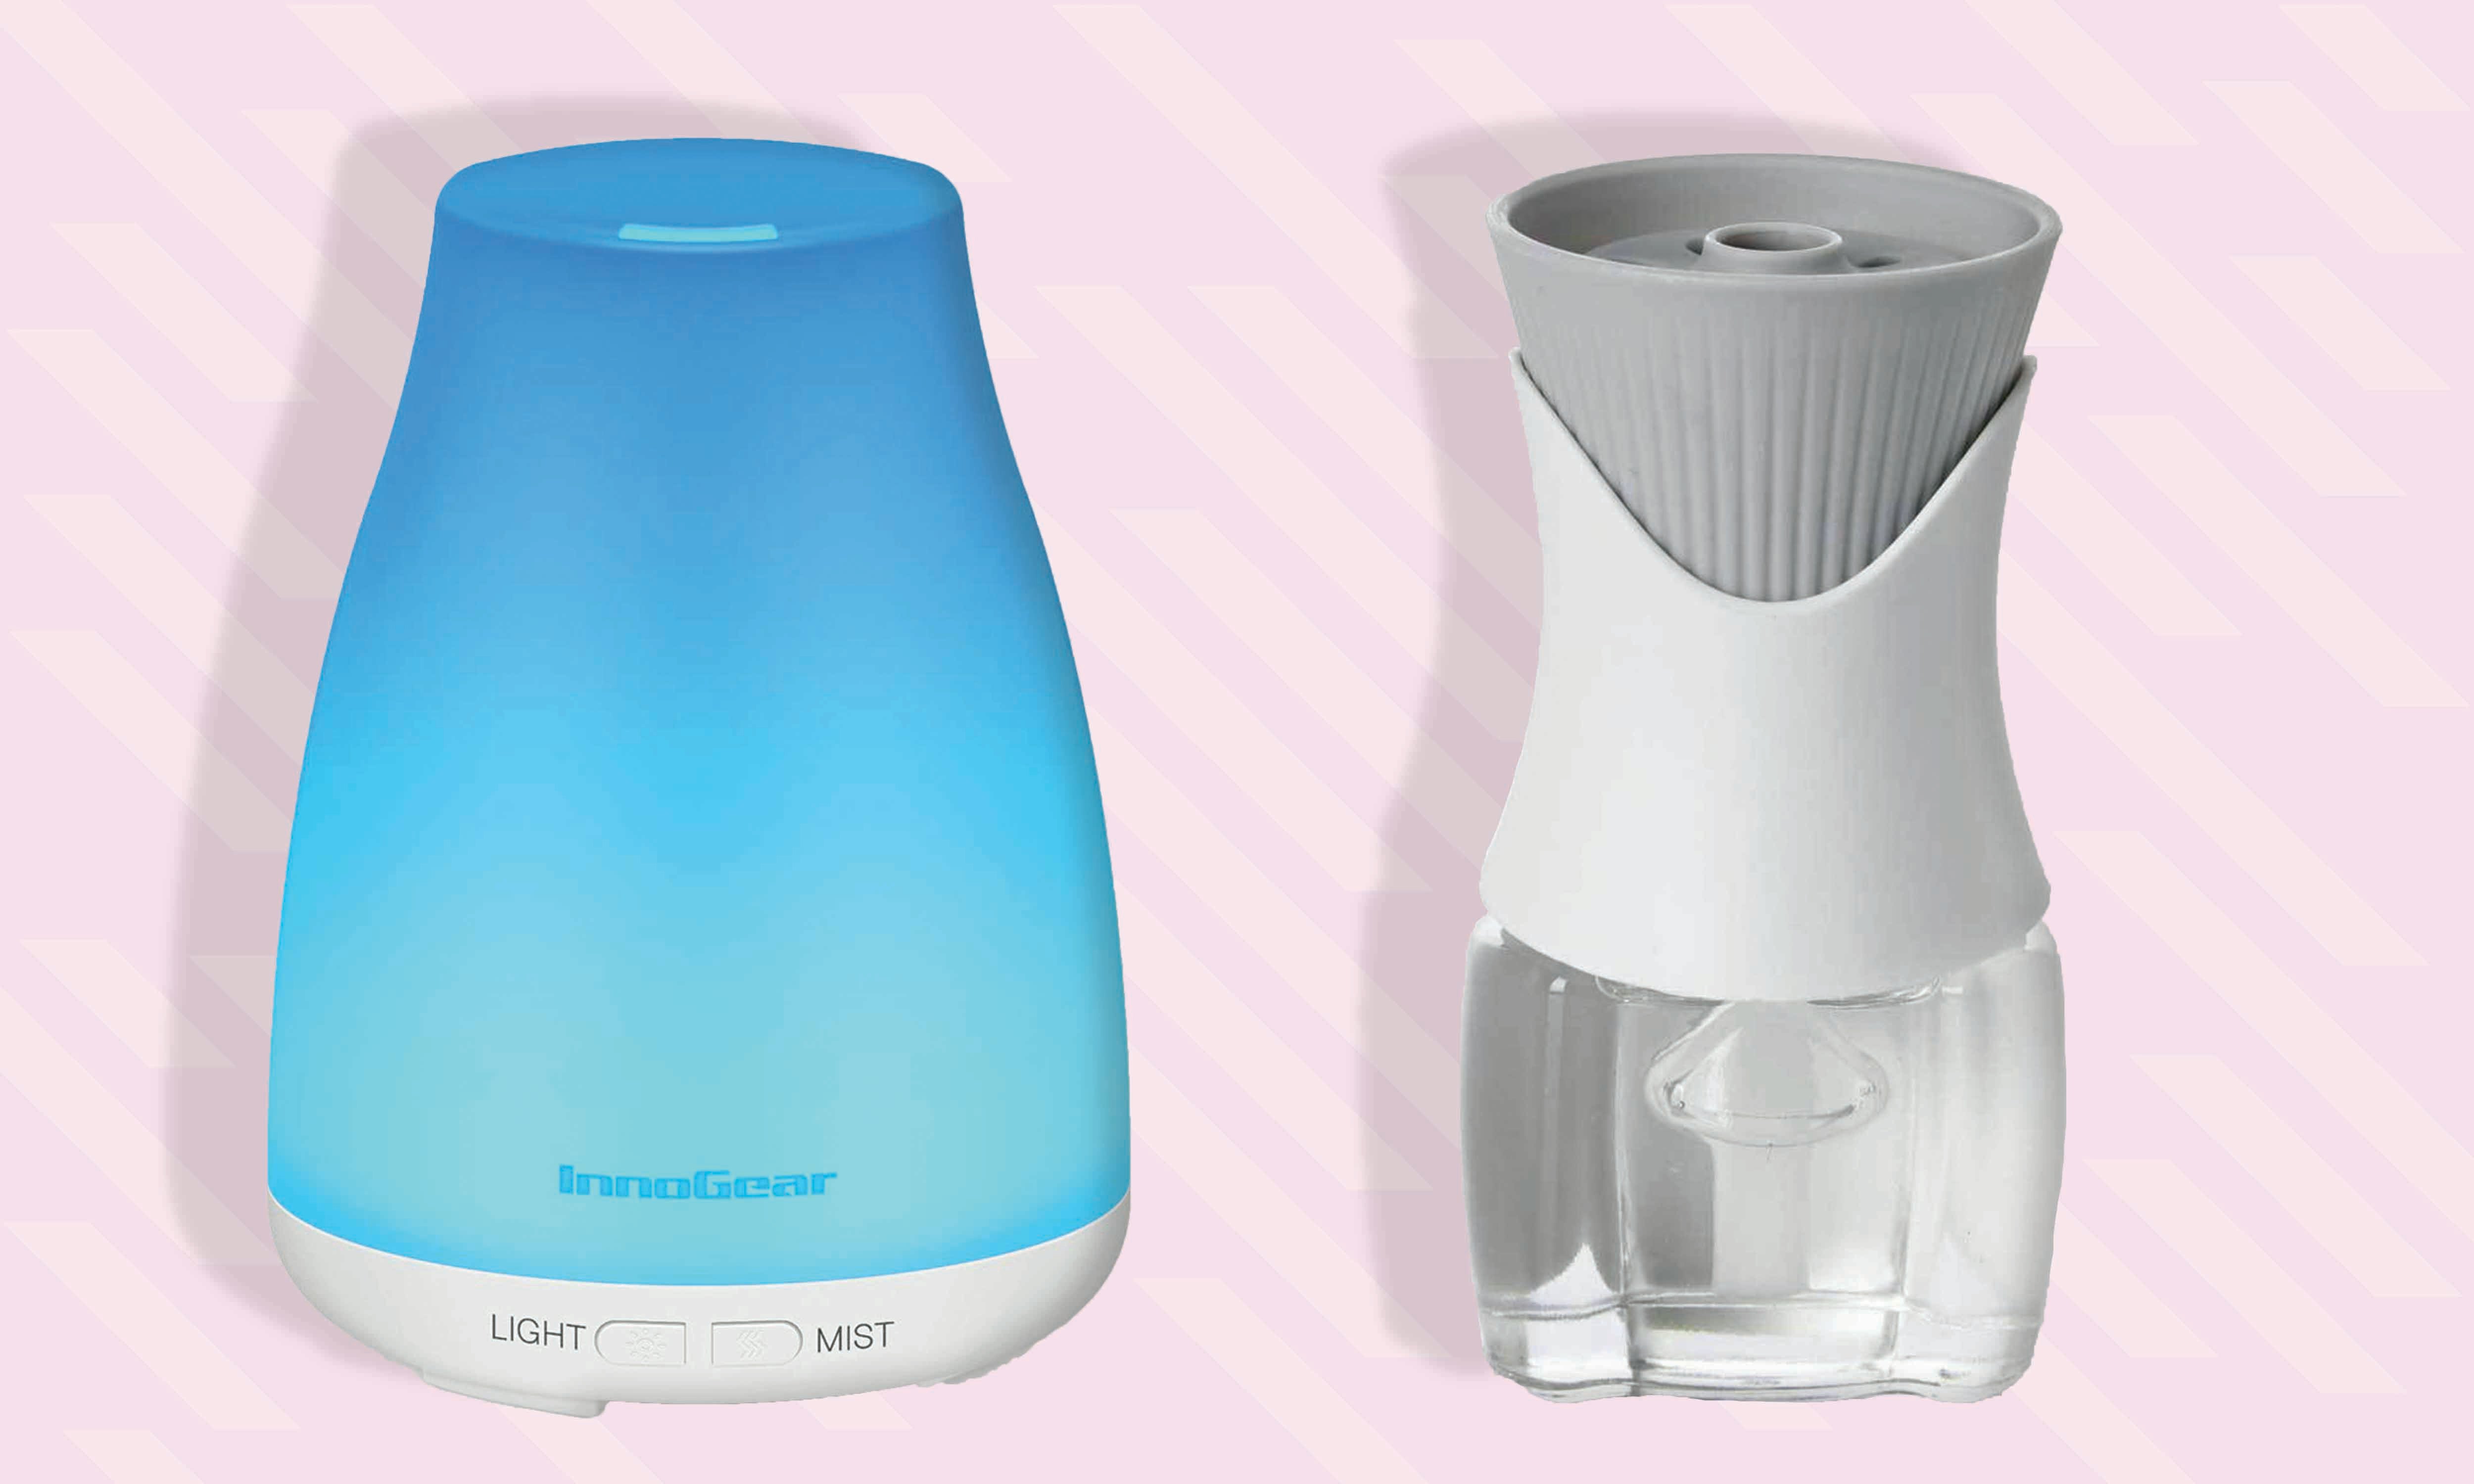 The 3 Best Electric Air Fresheners